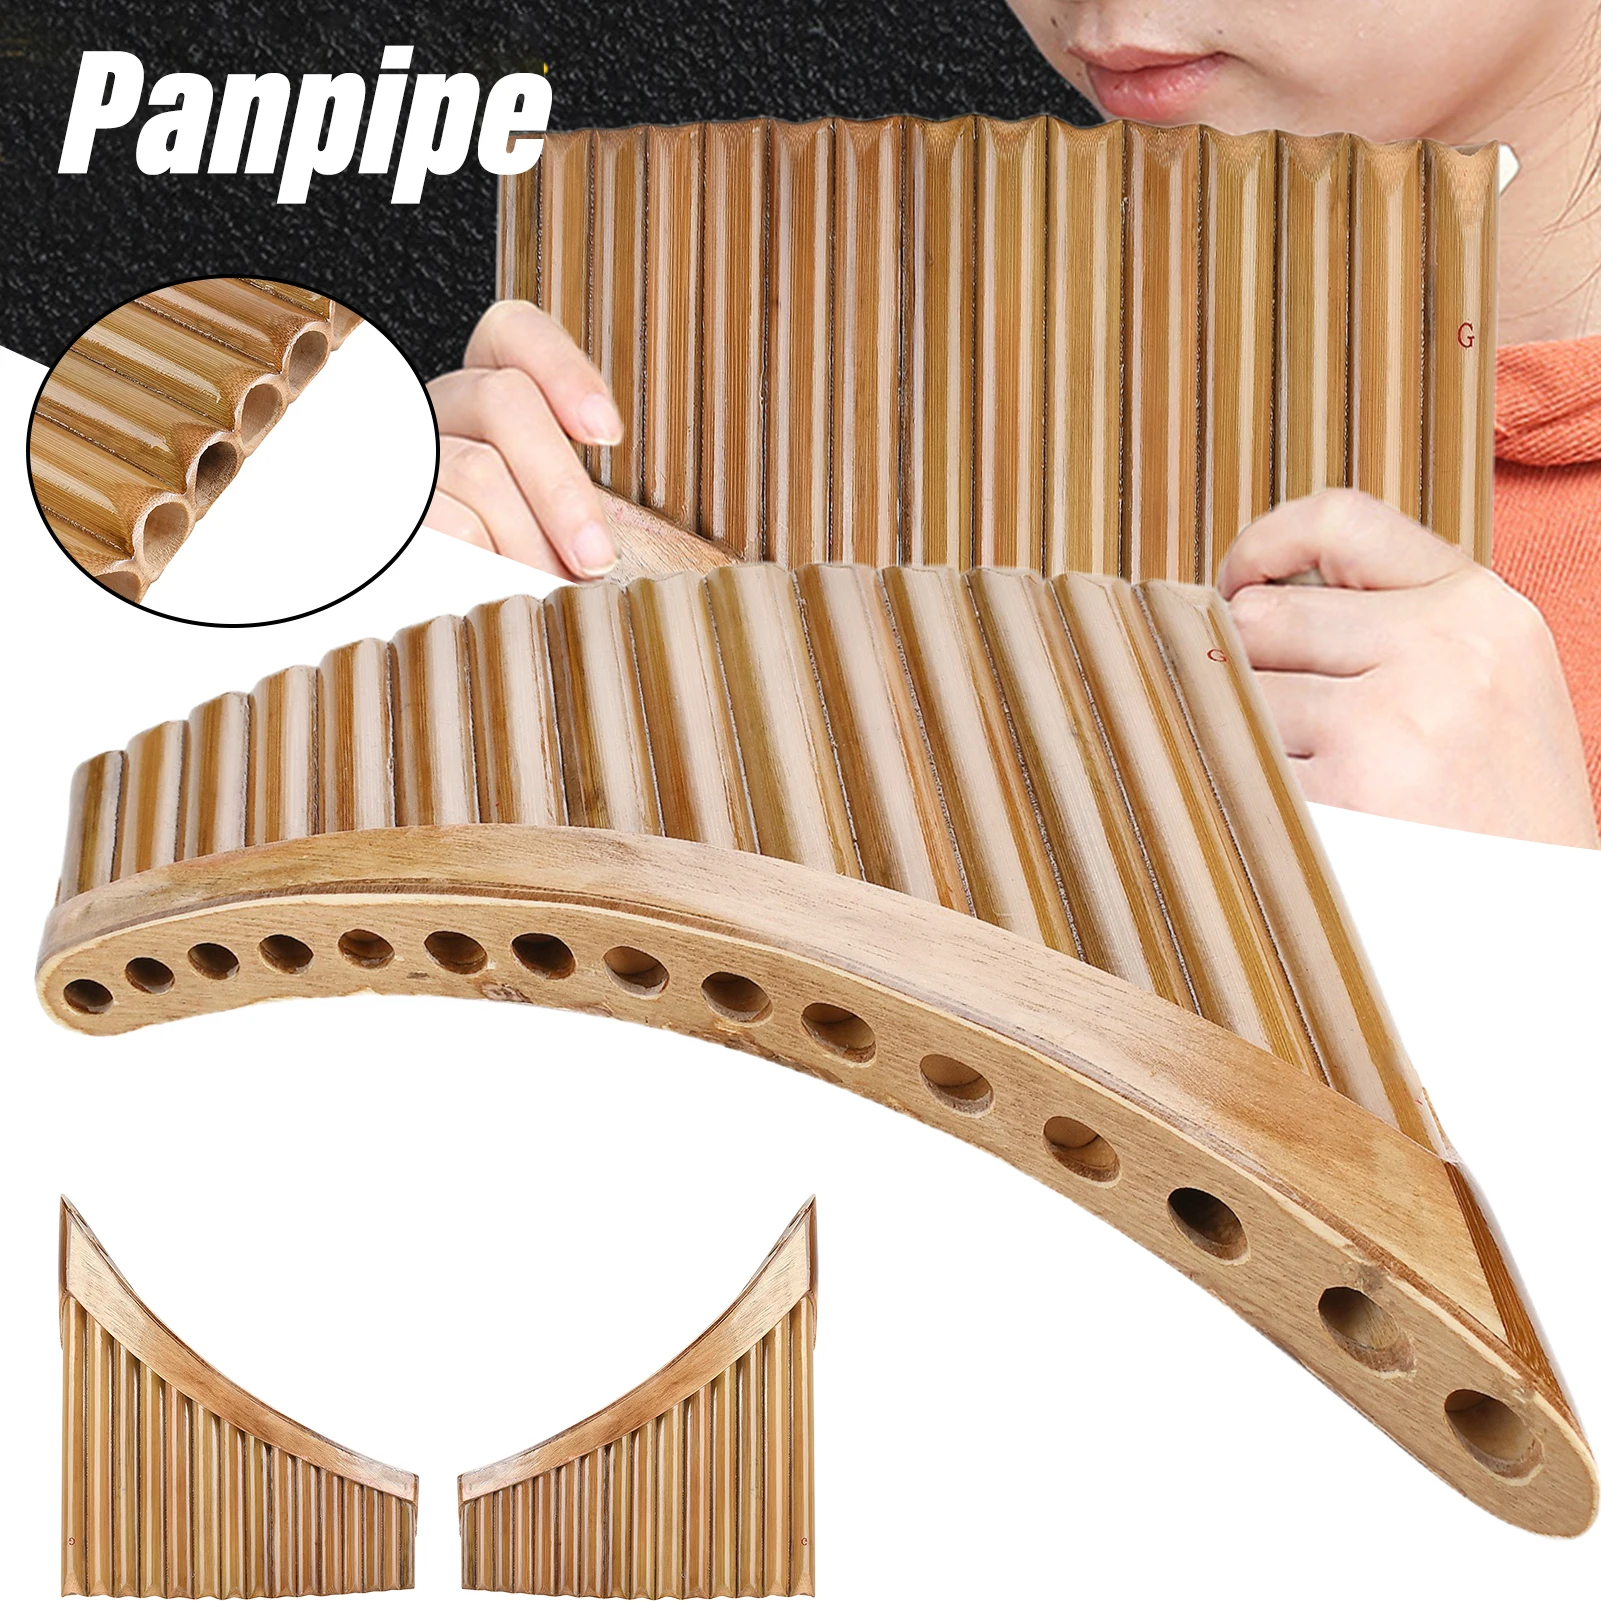 15 Pipes Bamboo Pan Flute G Key Chinese Traditional Musical Instrument Panpipes For Beginners and Students Best Gift Durable EDF